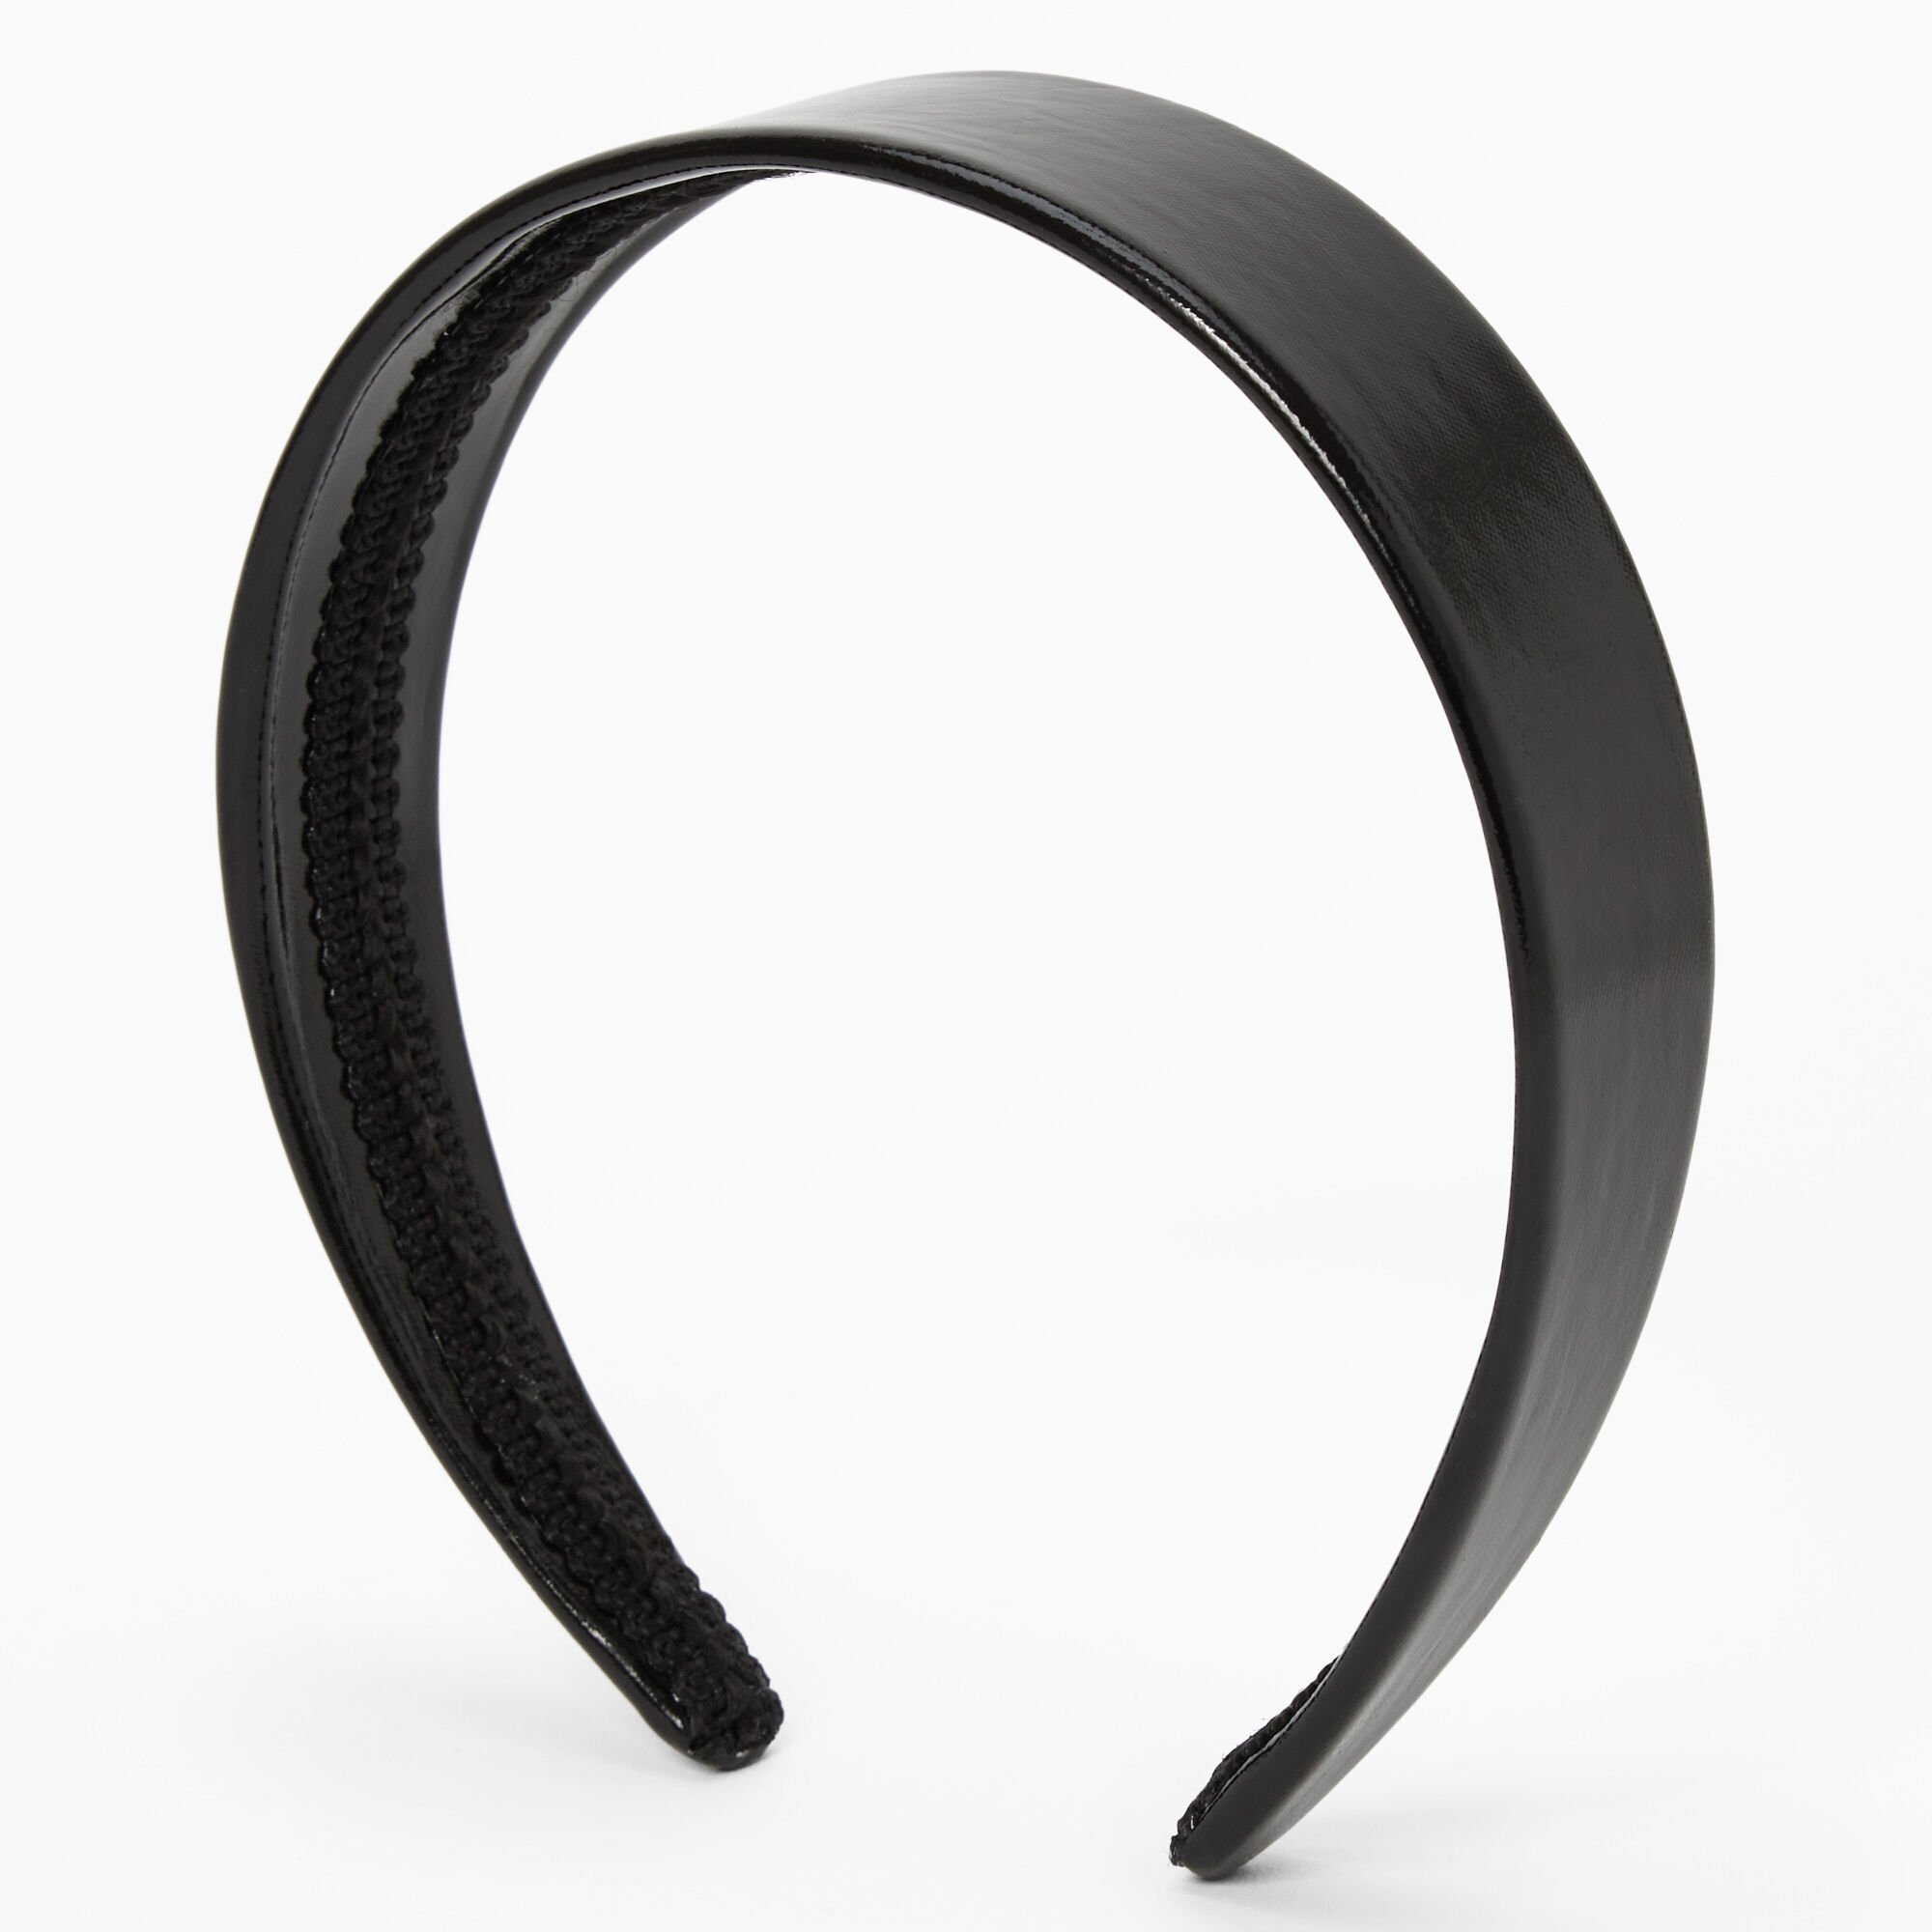 View Claires Pu Wide Headband Black information